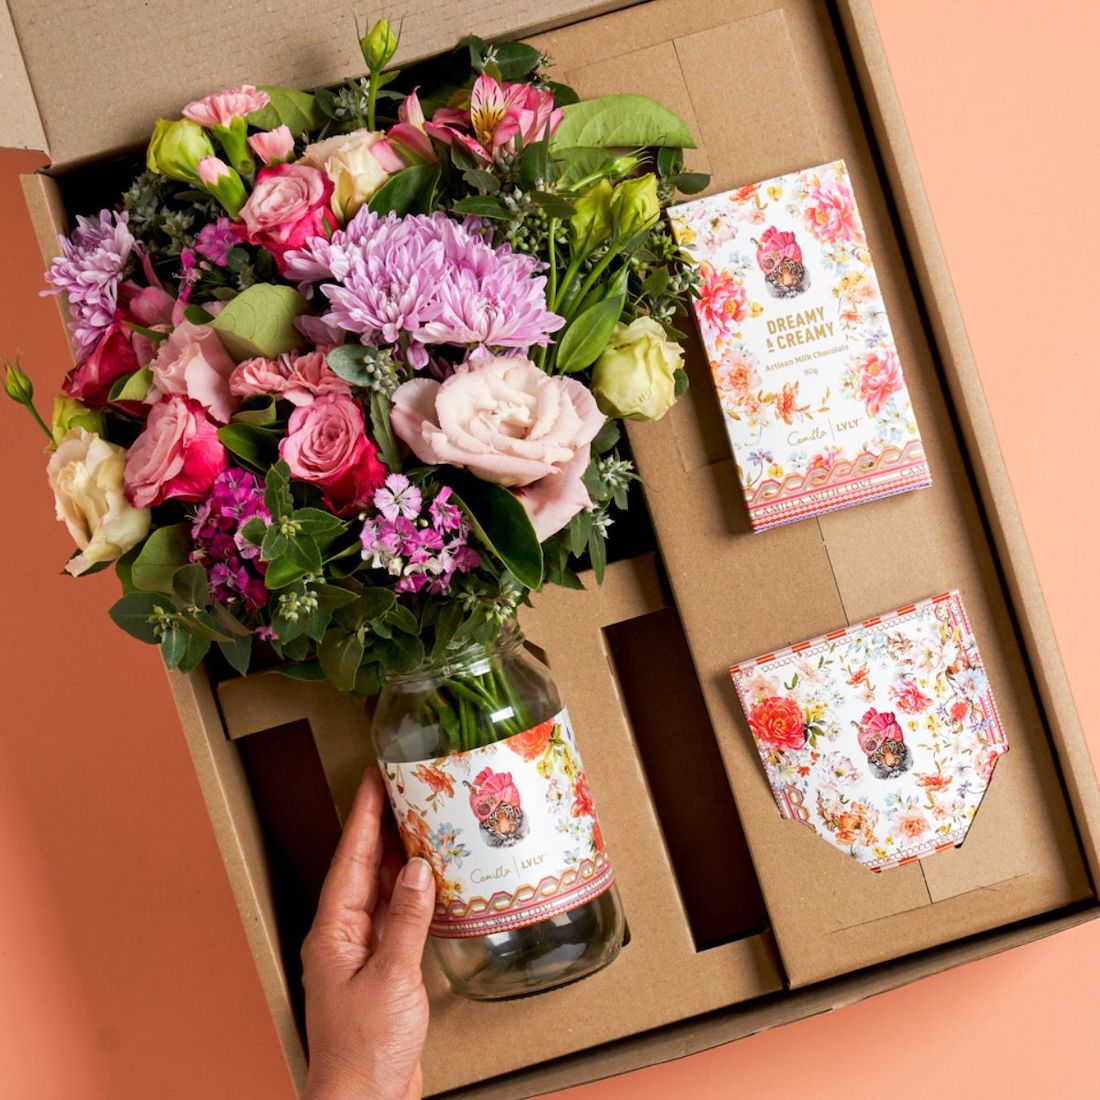 LVLY Mothers Day gift box